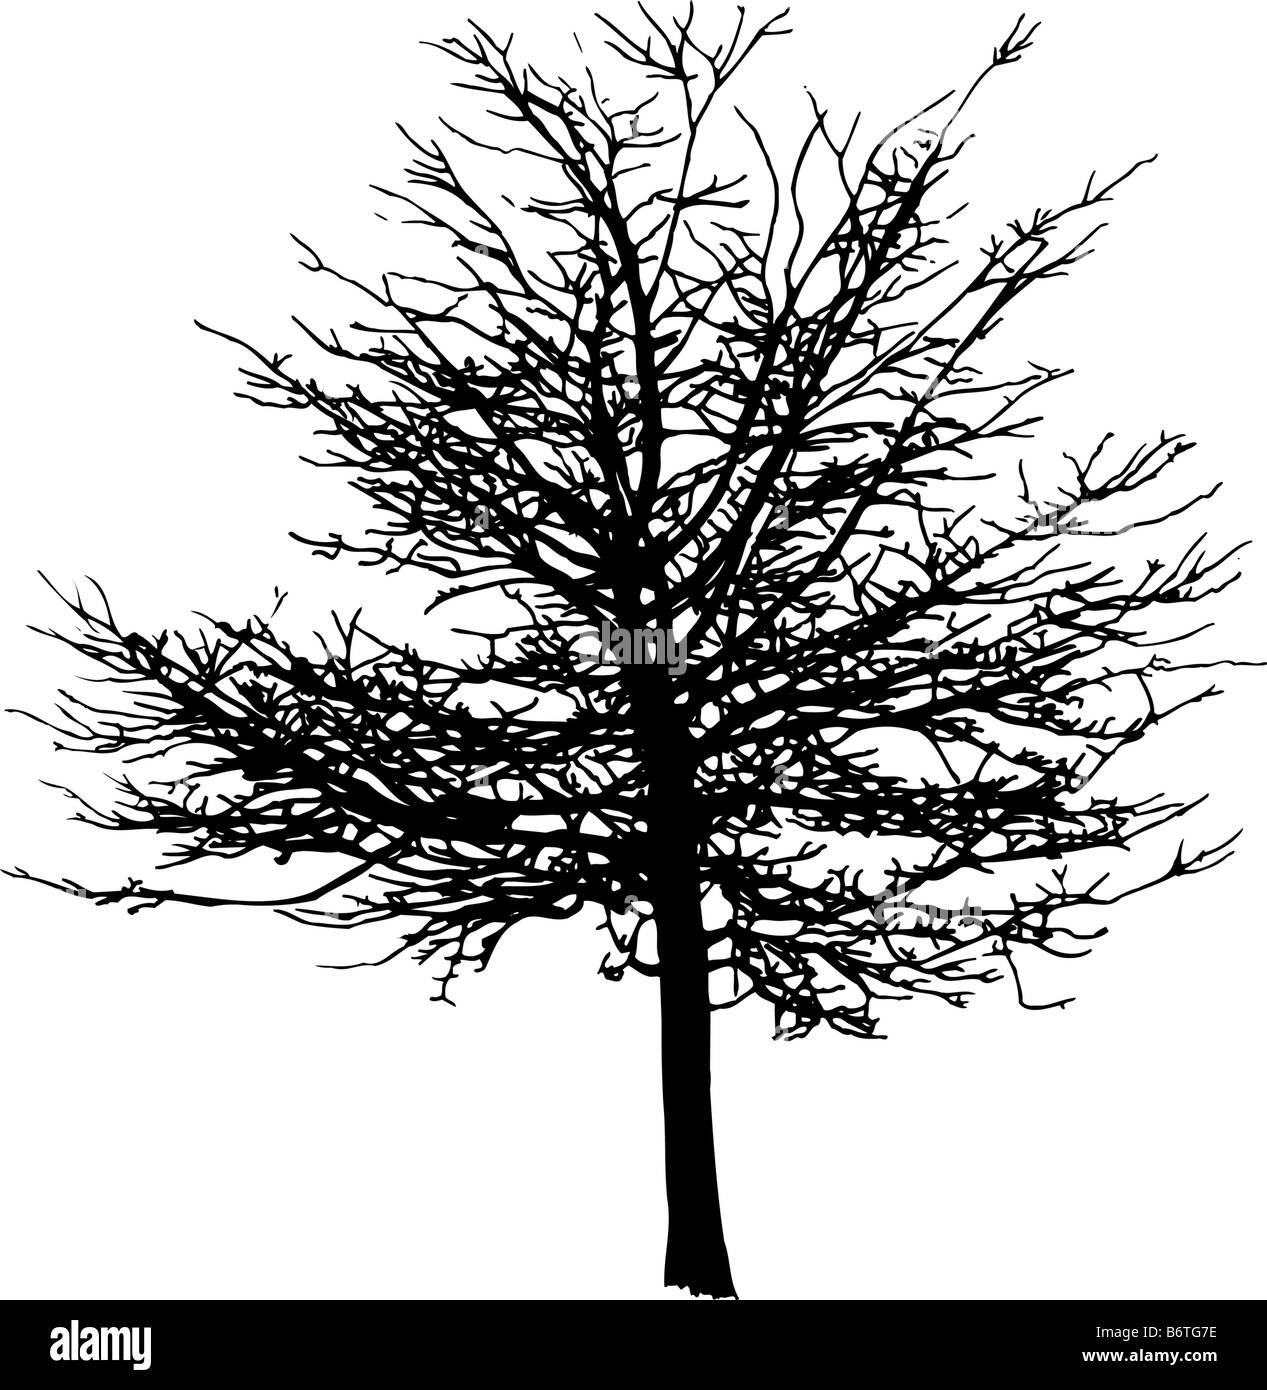 Silhouette of a winter tree Stock Photo